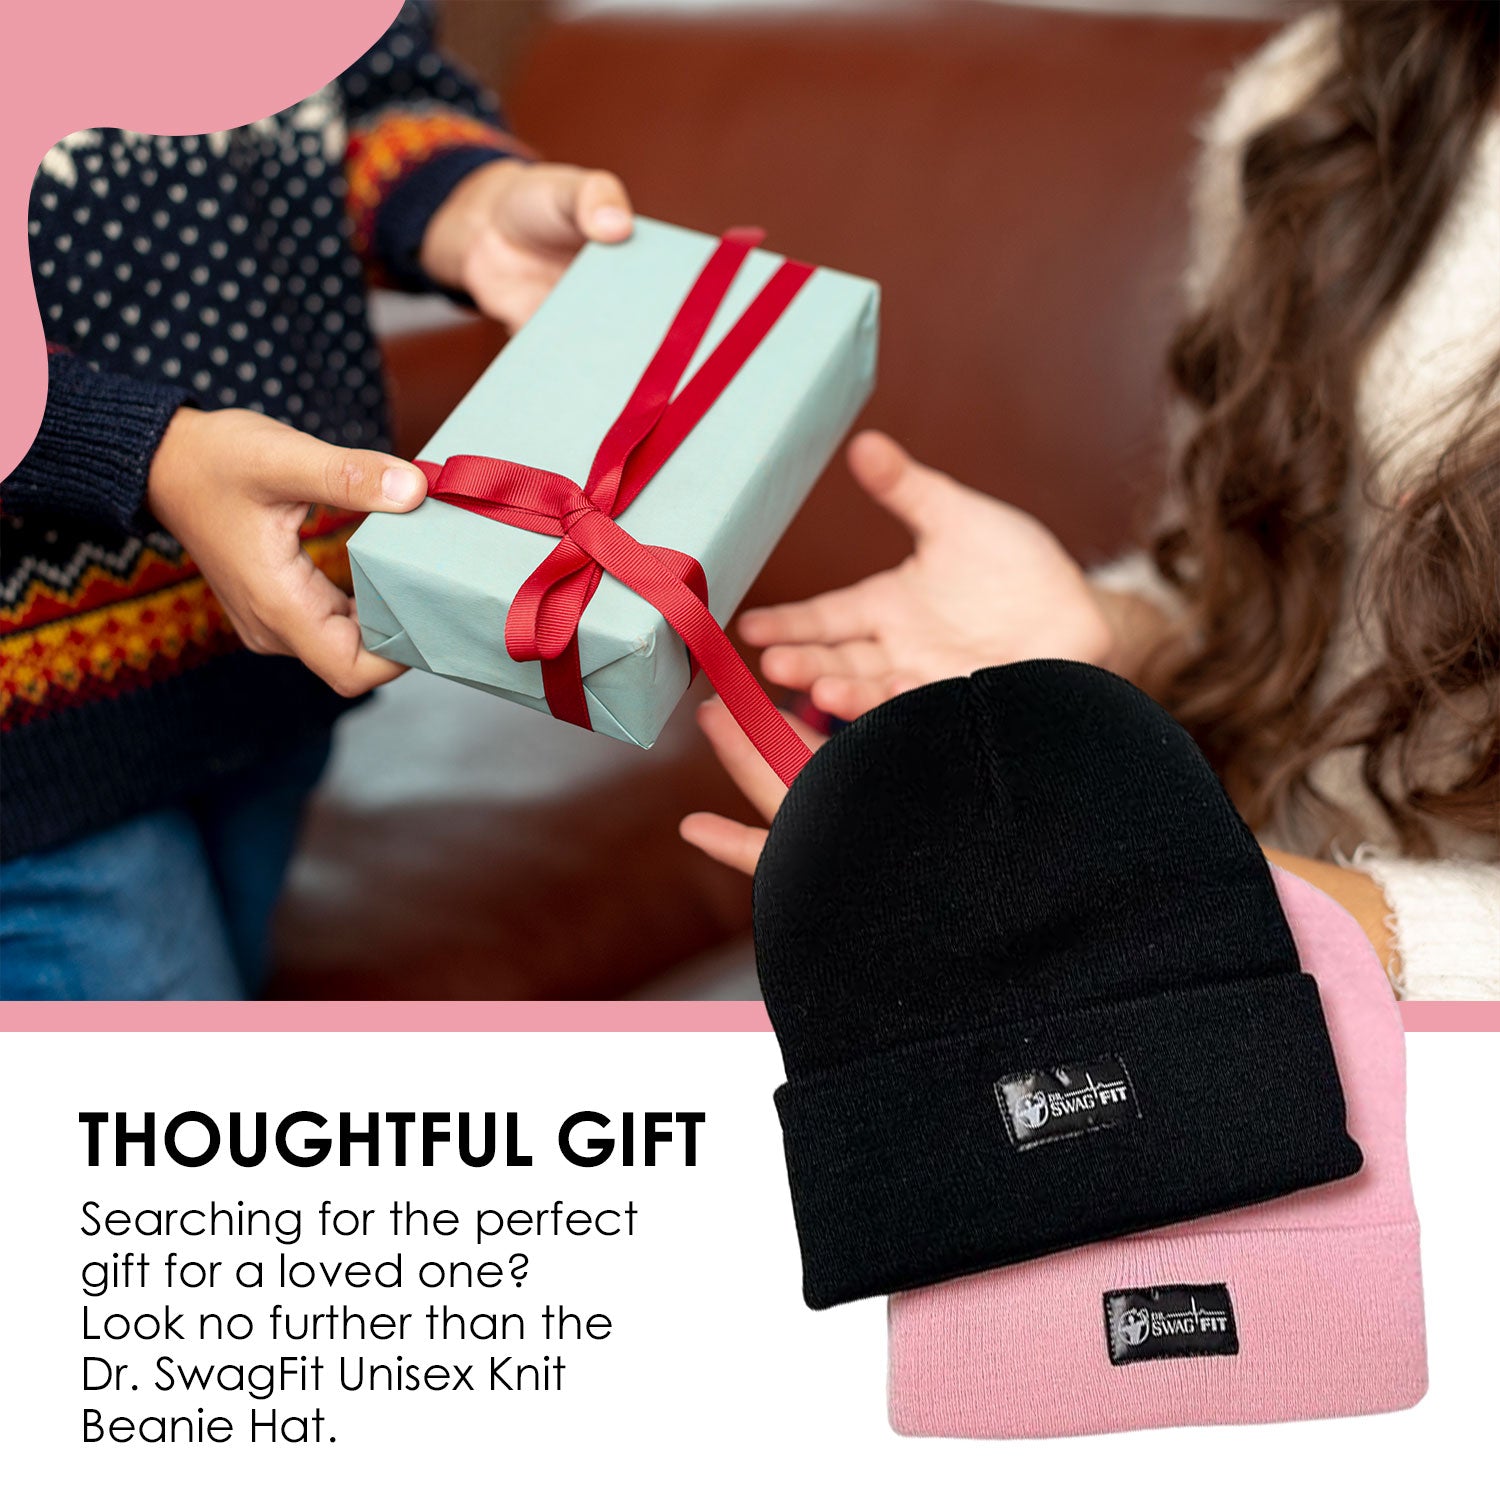 Dr. SwagFit Beanie for Women and Men, Classic Stretchy Fleece Winter Skull Cap, Soft and Comfy Knitted Beanie